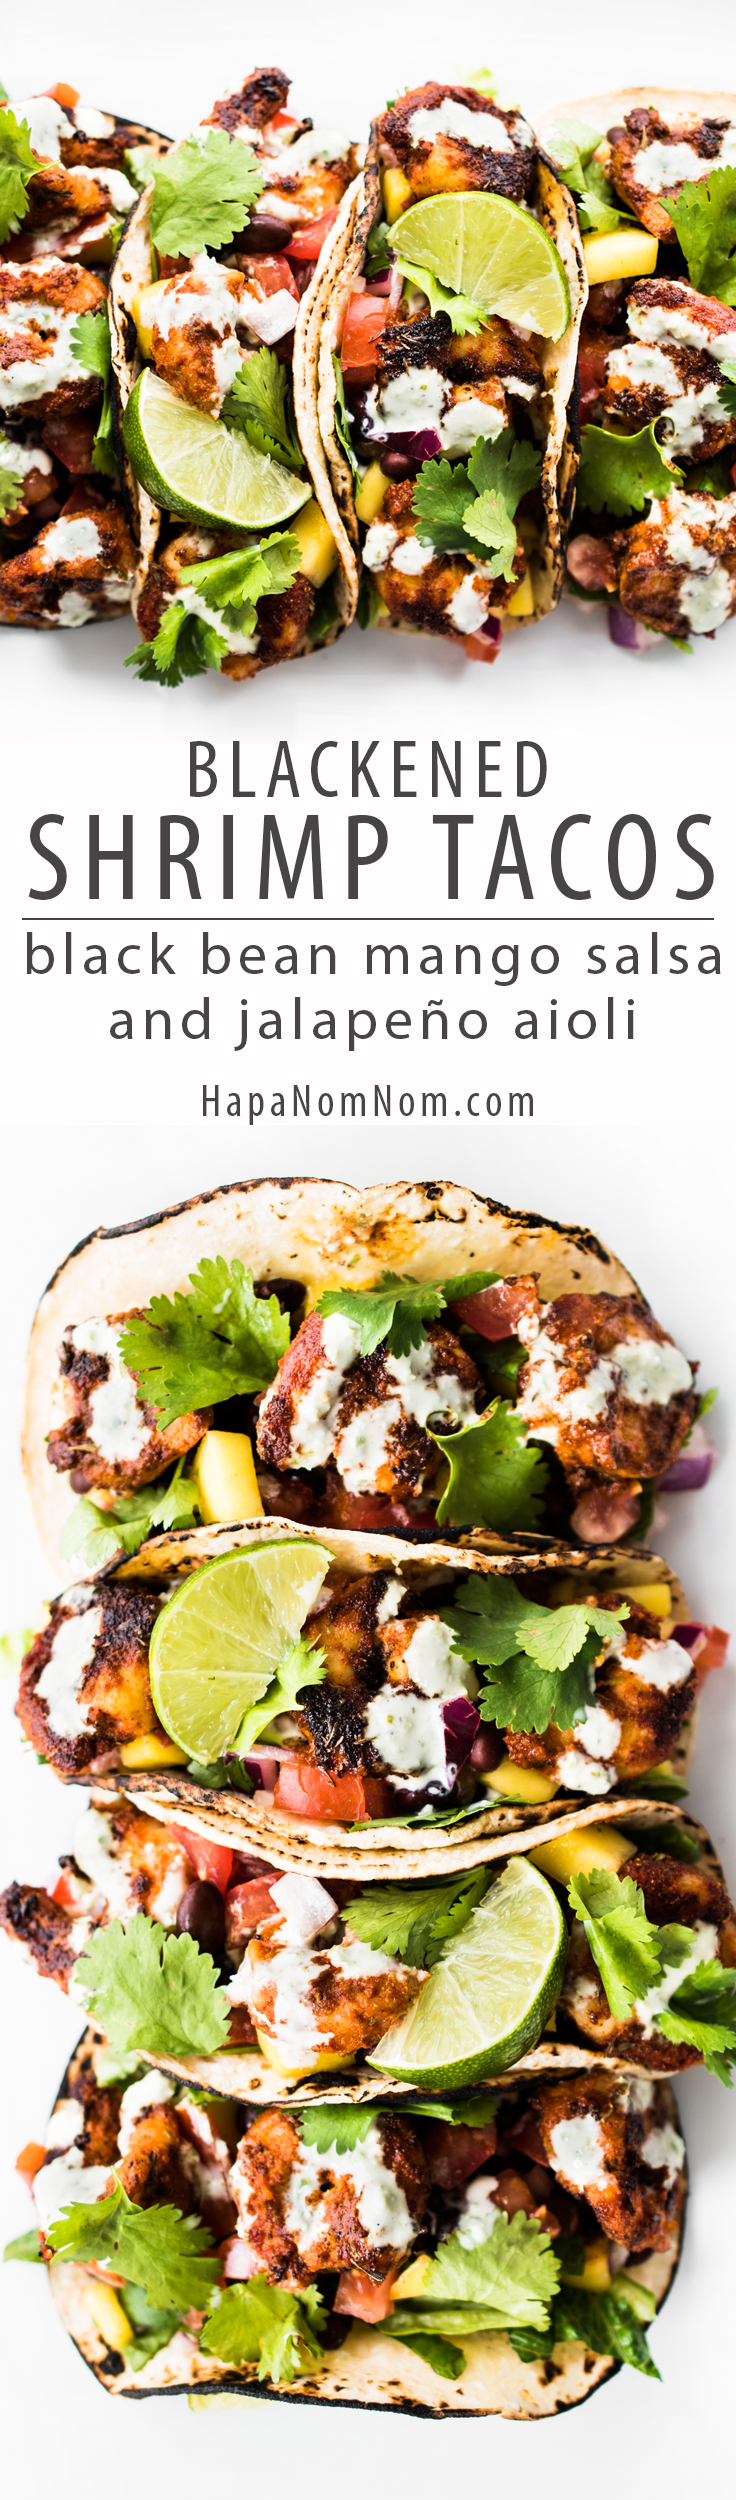 Blackened Shrimp Tacos with Black Bean Mango Salsa and Jalapeño Aioli - spicy, tangy, sweet, and completely delicious! Bring an appetite and lots of napkins! 